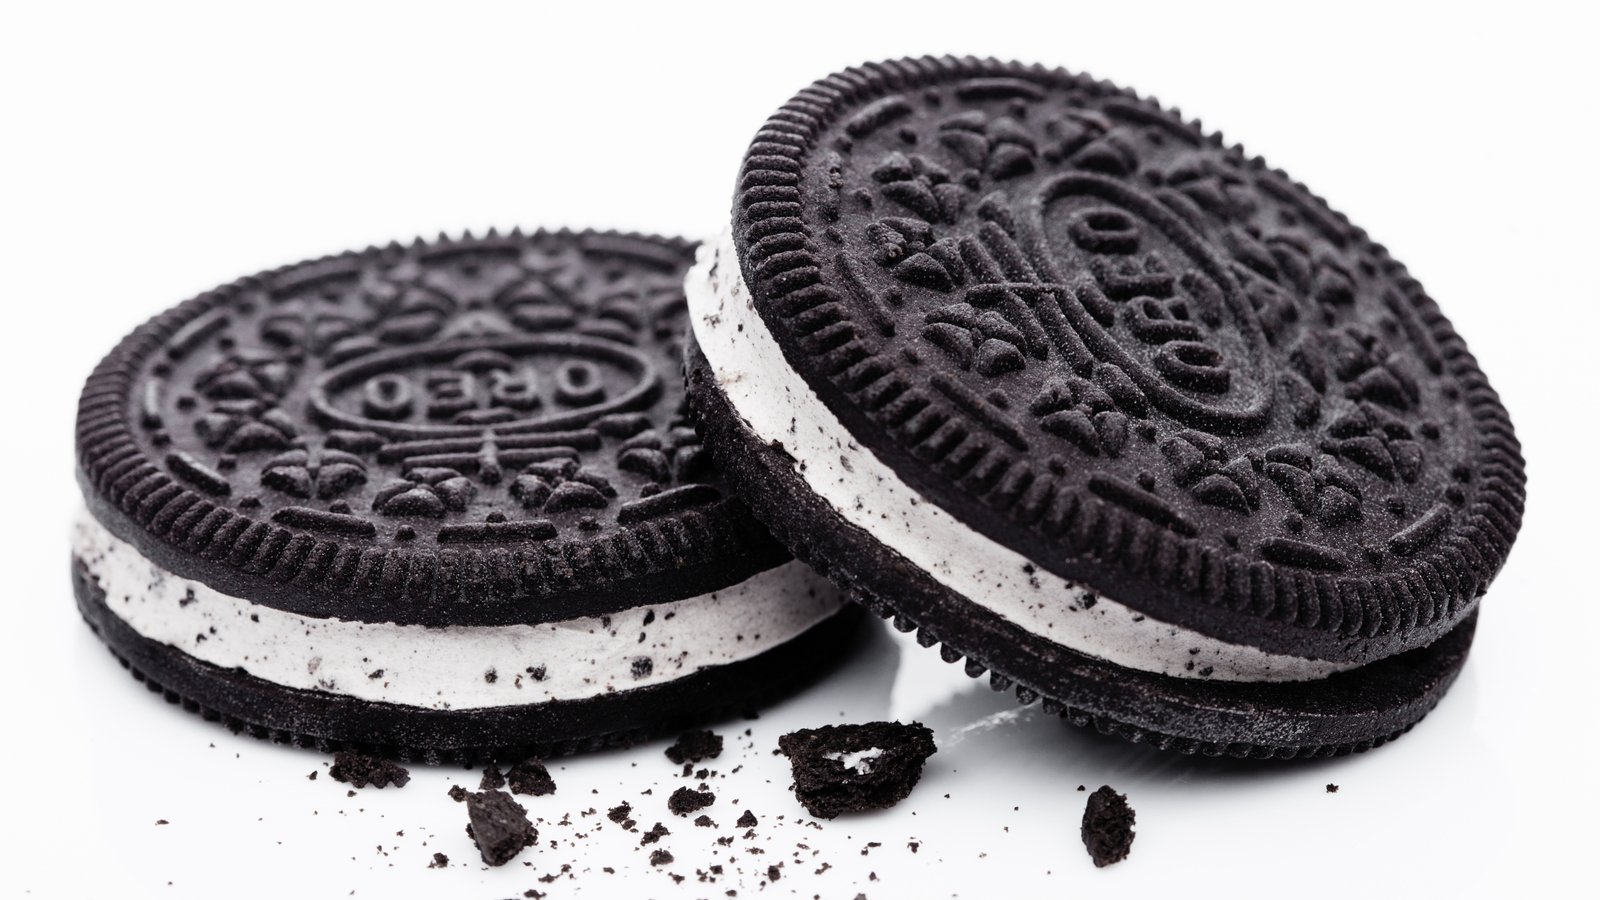 1. Oreo Collect to Win Code - wide 10